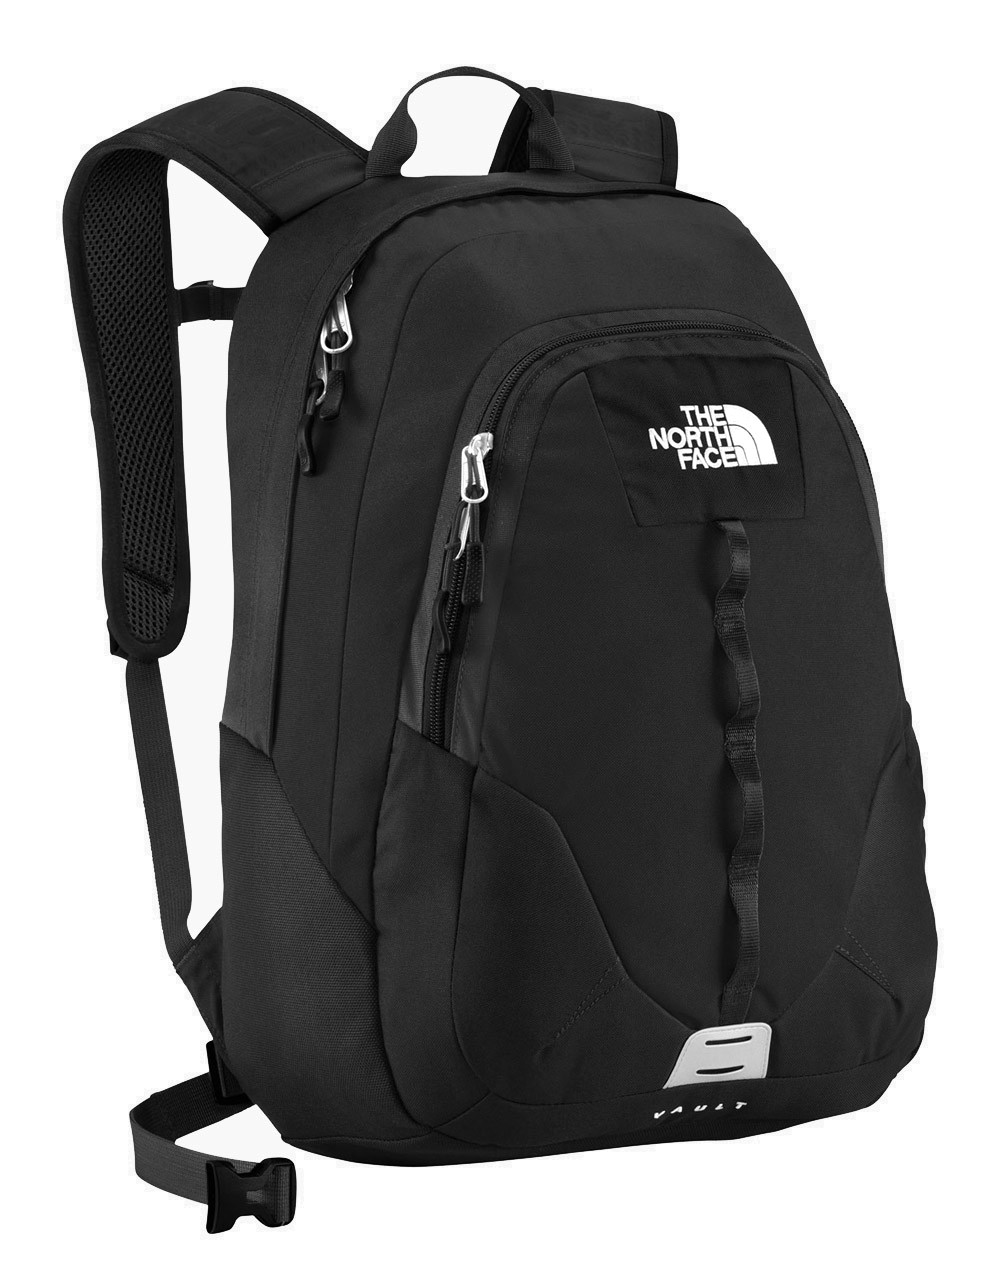 Vault by THE NORTH FACE (color: tnf black) € 20,00